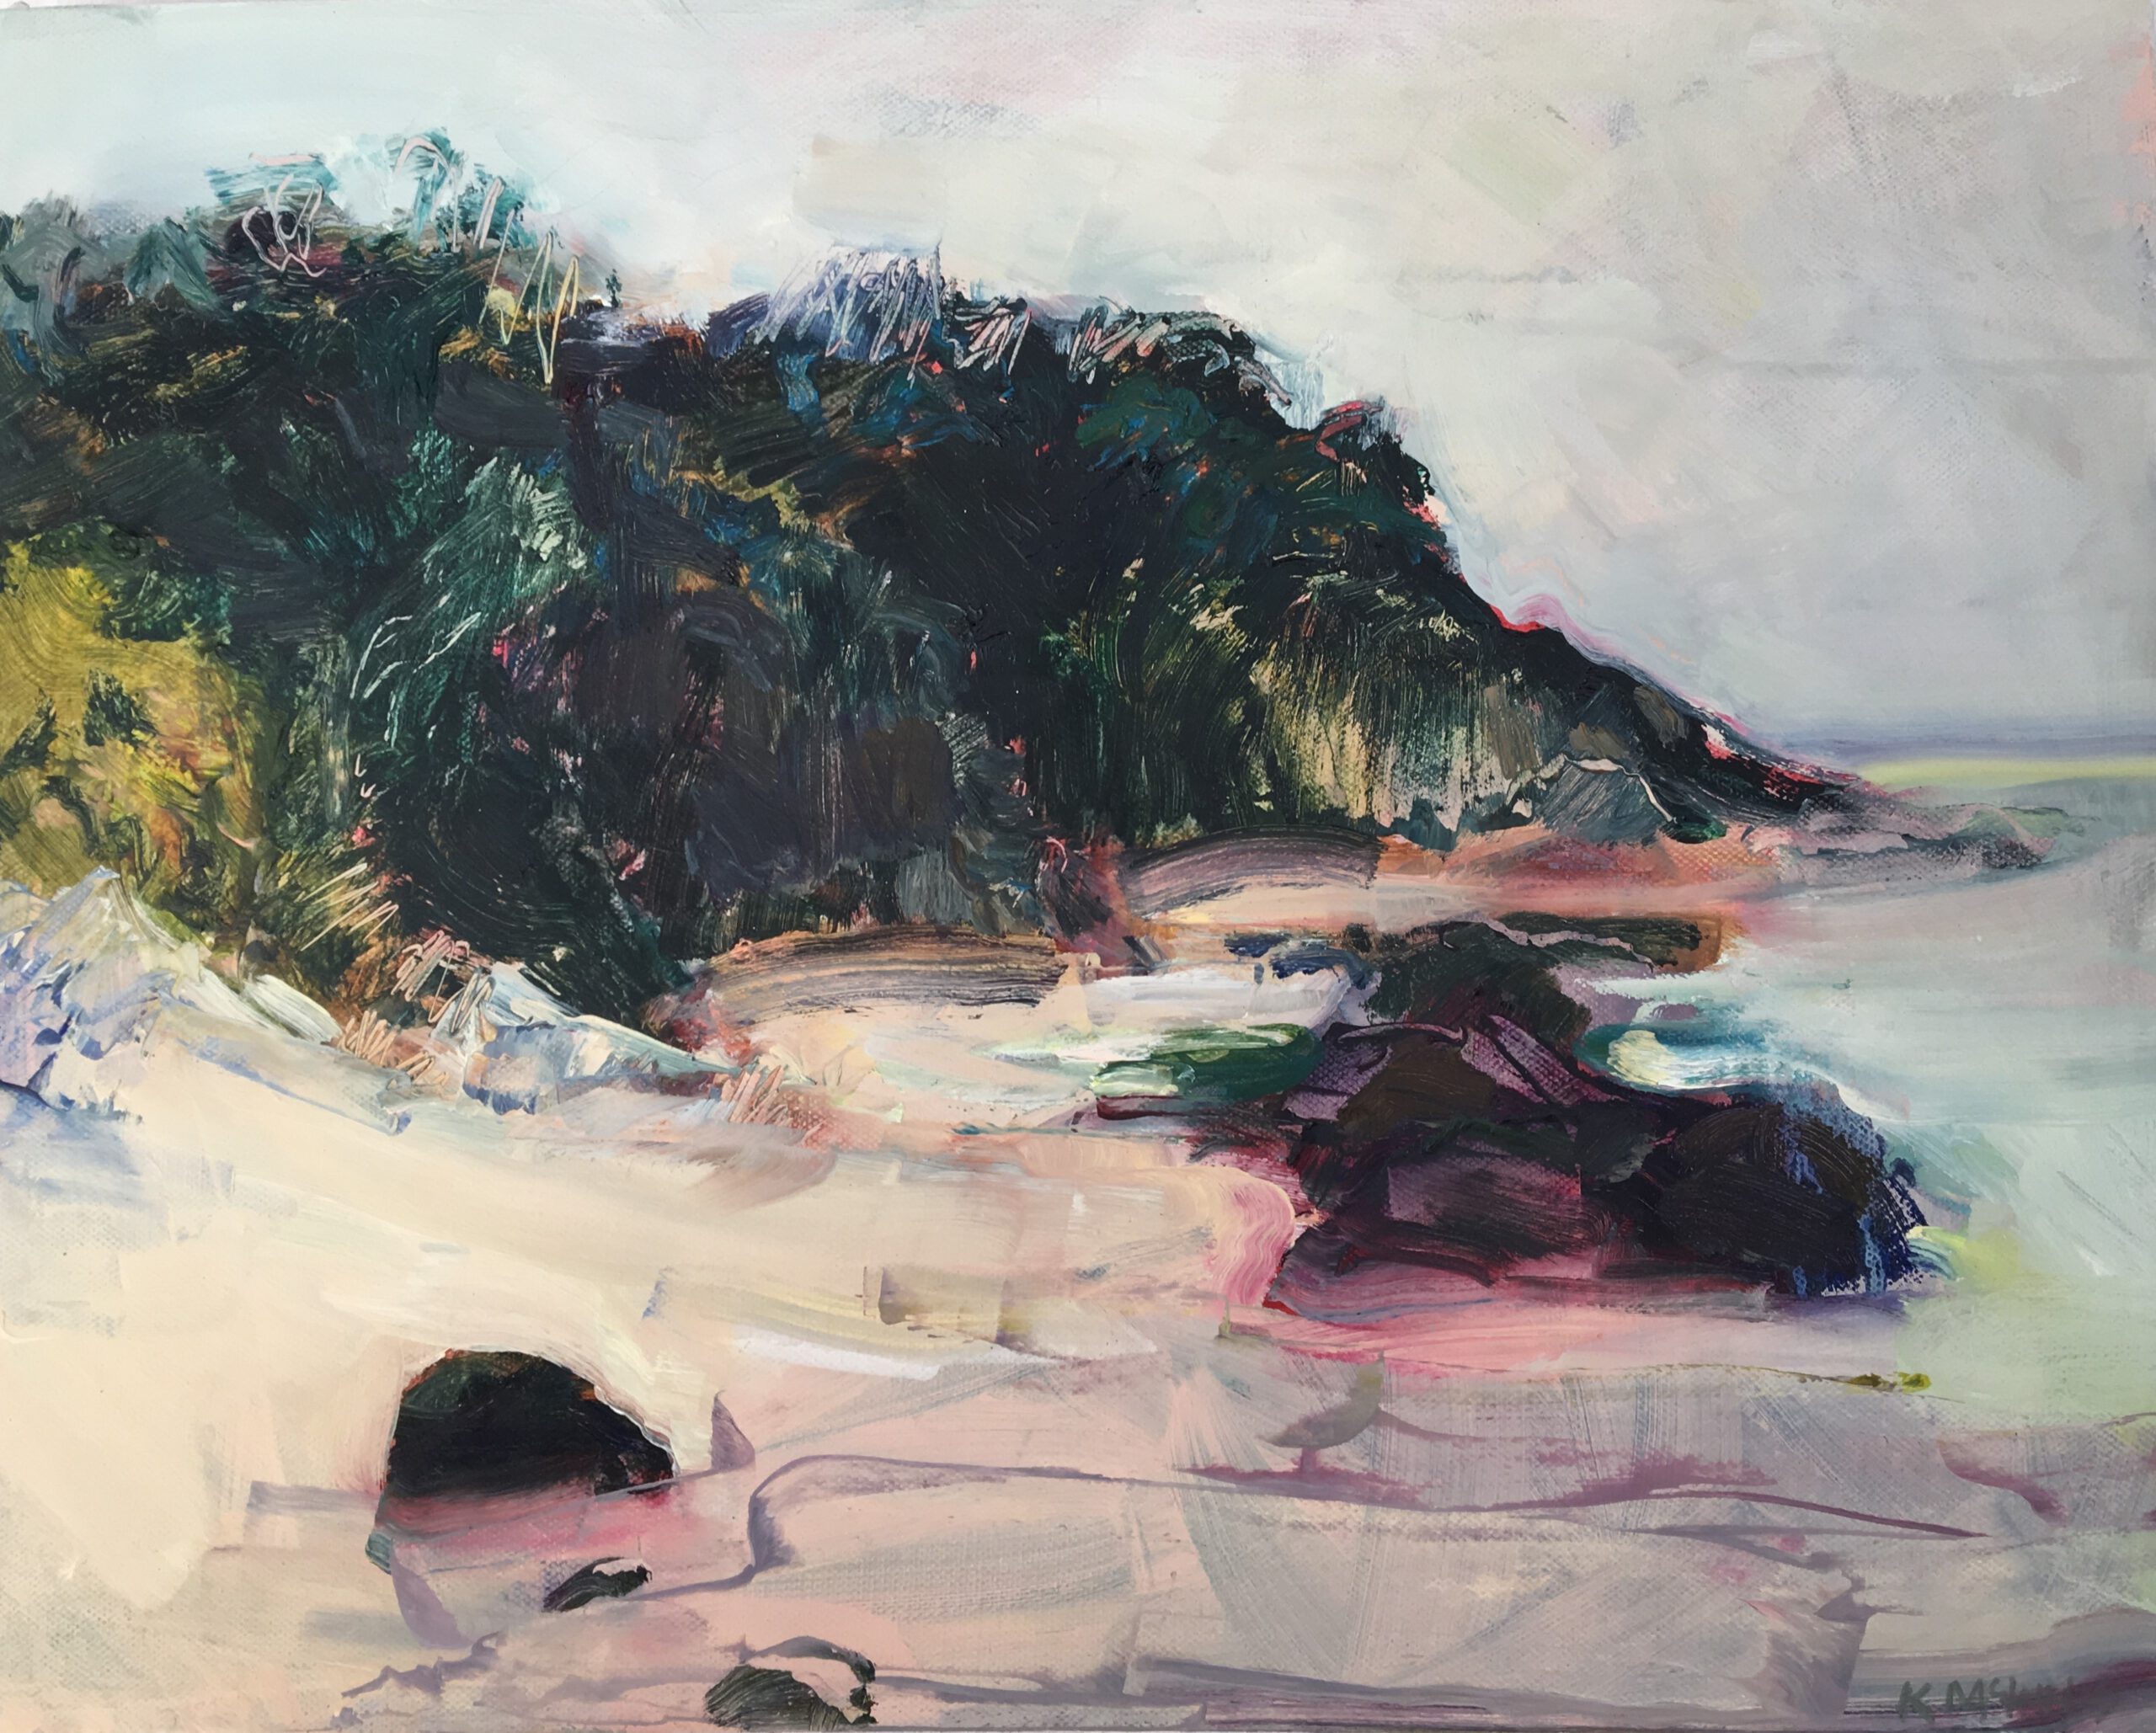 Kerry McInnis 'Afternoon Mystery' Bay oil on canvas 35x45cm $2,700